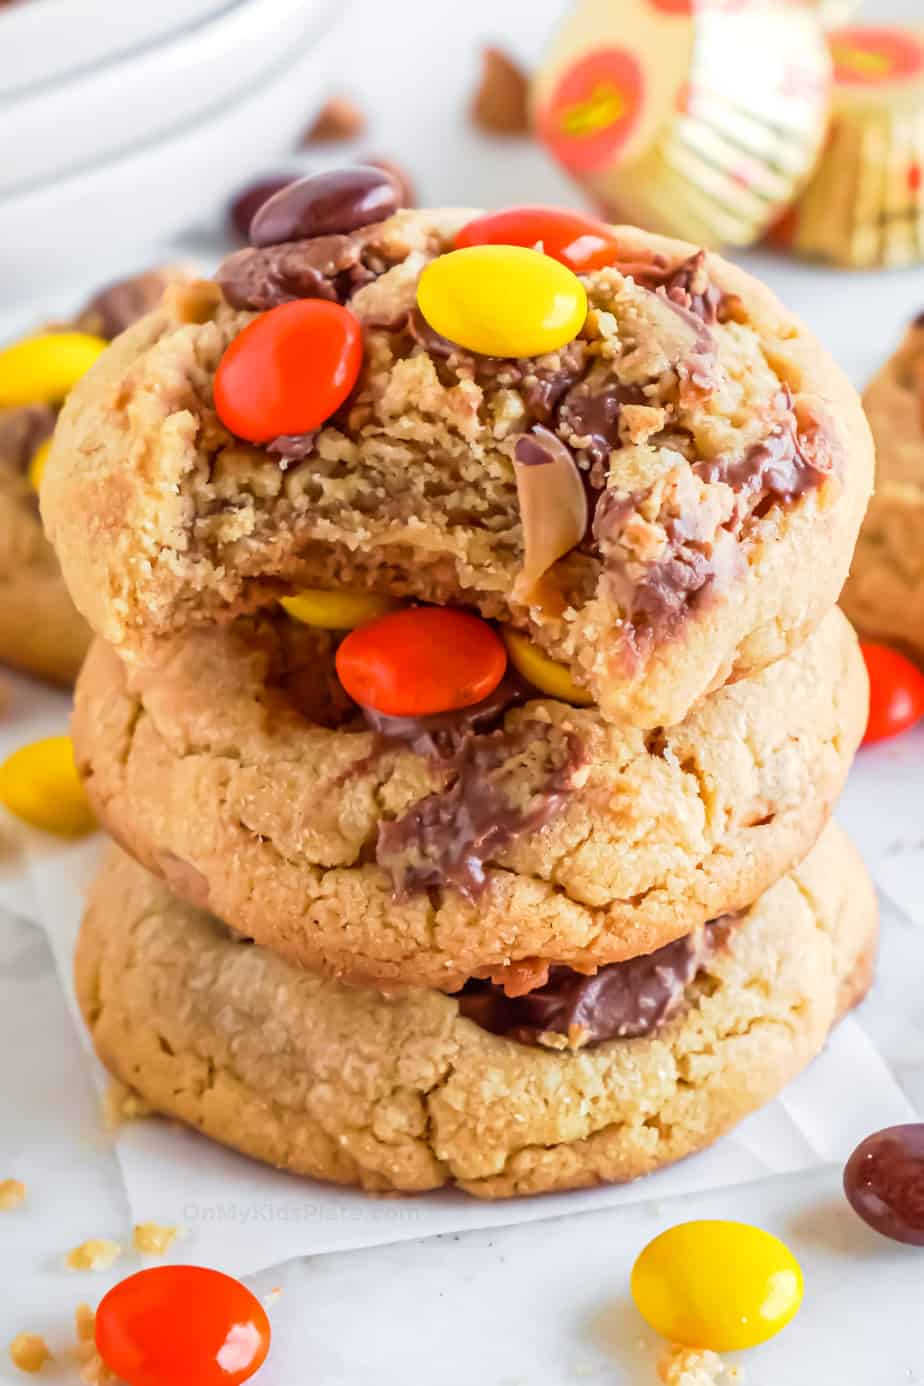 Stack of cookies topped with Reese's pieces and peanut butter cup pieces. The top cookie has a bite missing